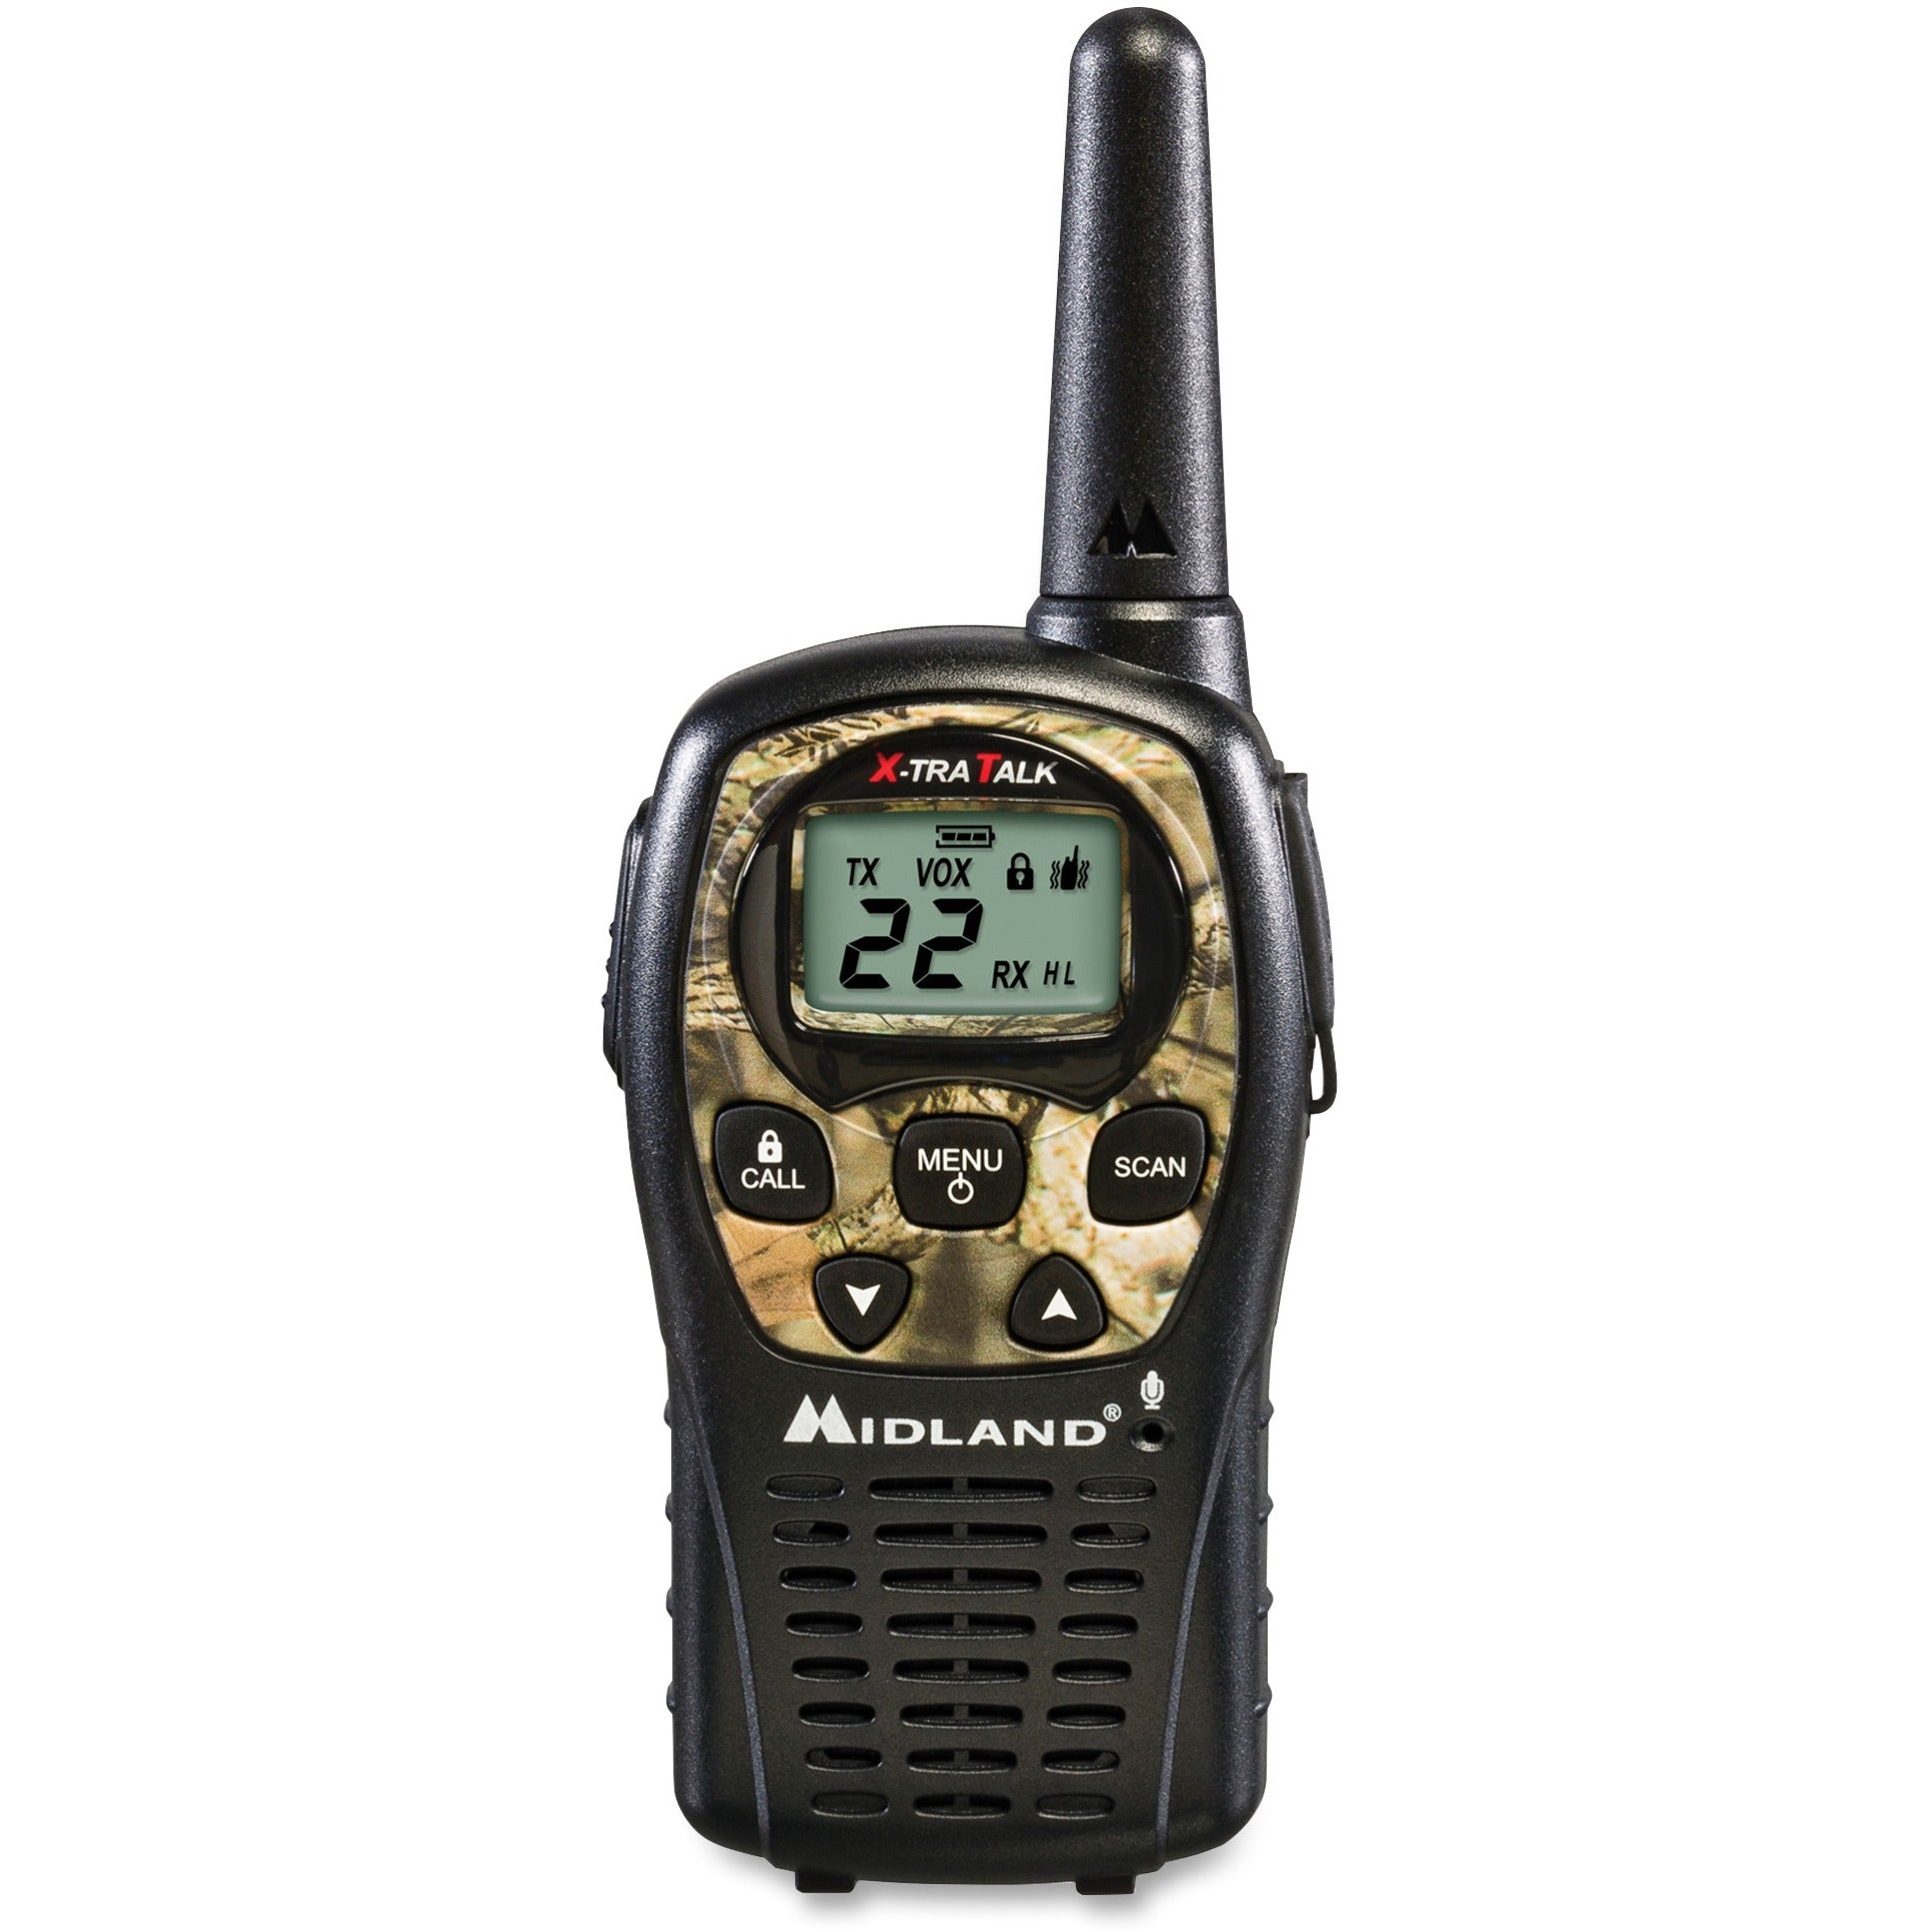 Midland LXT535VP3 24-mile Range 2-Way - 22 Radio Channels - 22 GMRS - Upto 126720 ft - Auto Squelch, Keypad Lock, Silent Operation - Water Resistant - Camouflage, Mossy Oak - 2 Each - 